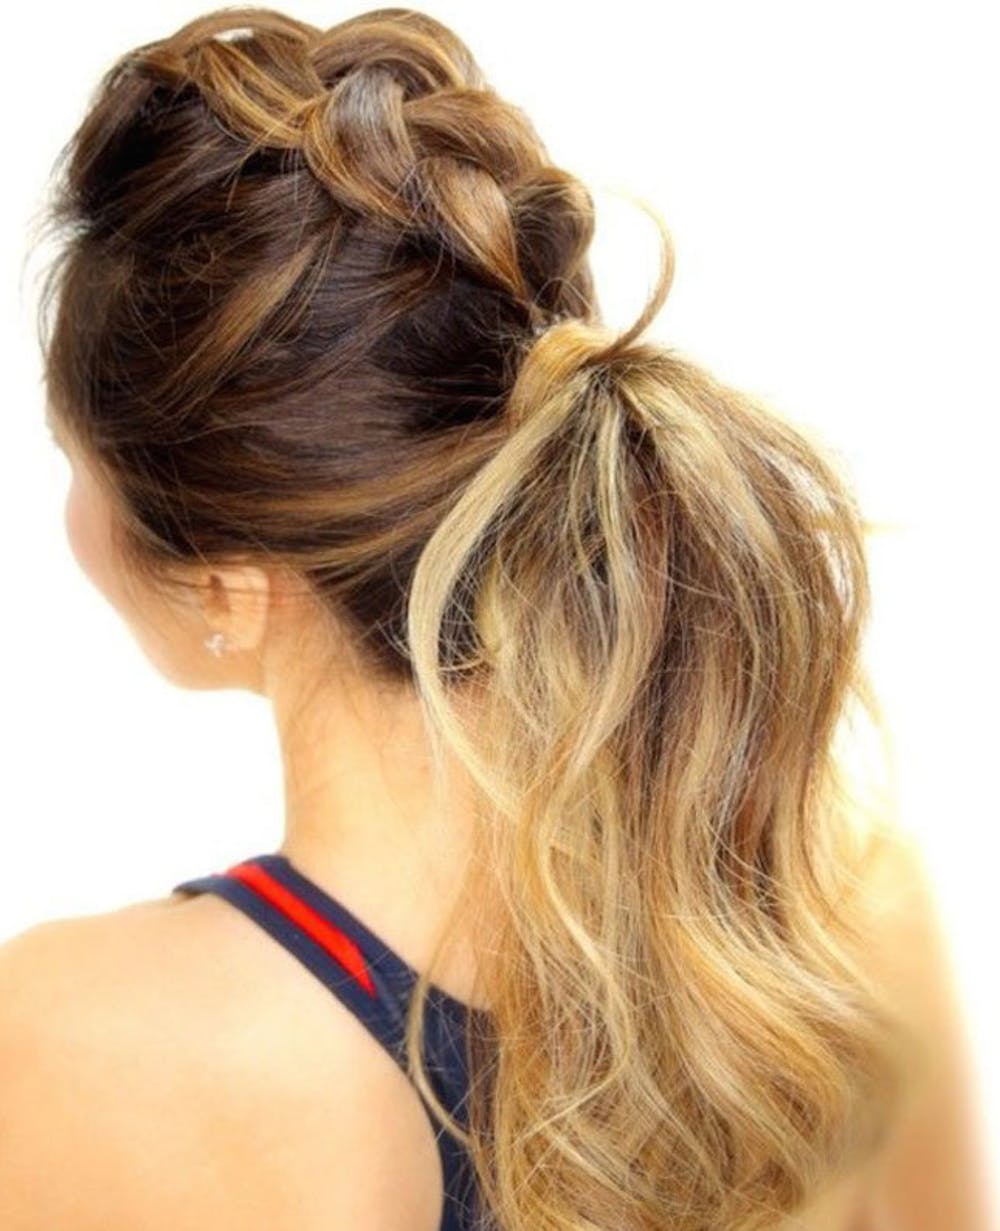 5 Updo Hairstyles Perfect For The Humid Season & How To Keep Them In Place  - ZULA.sg